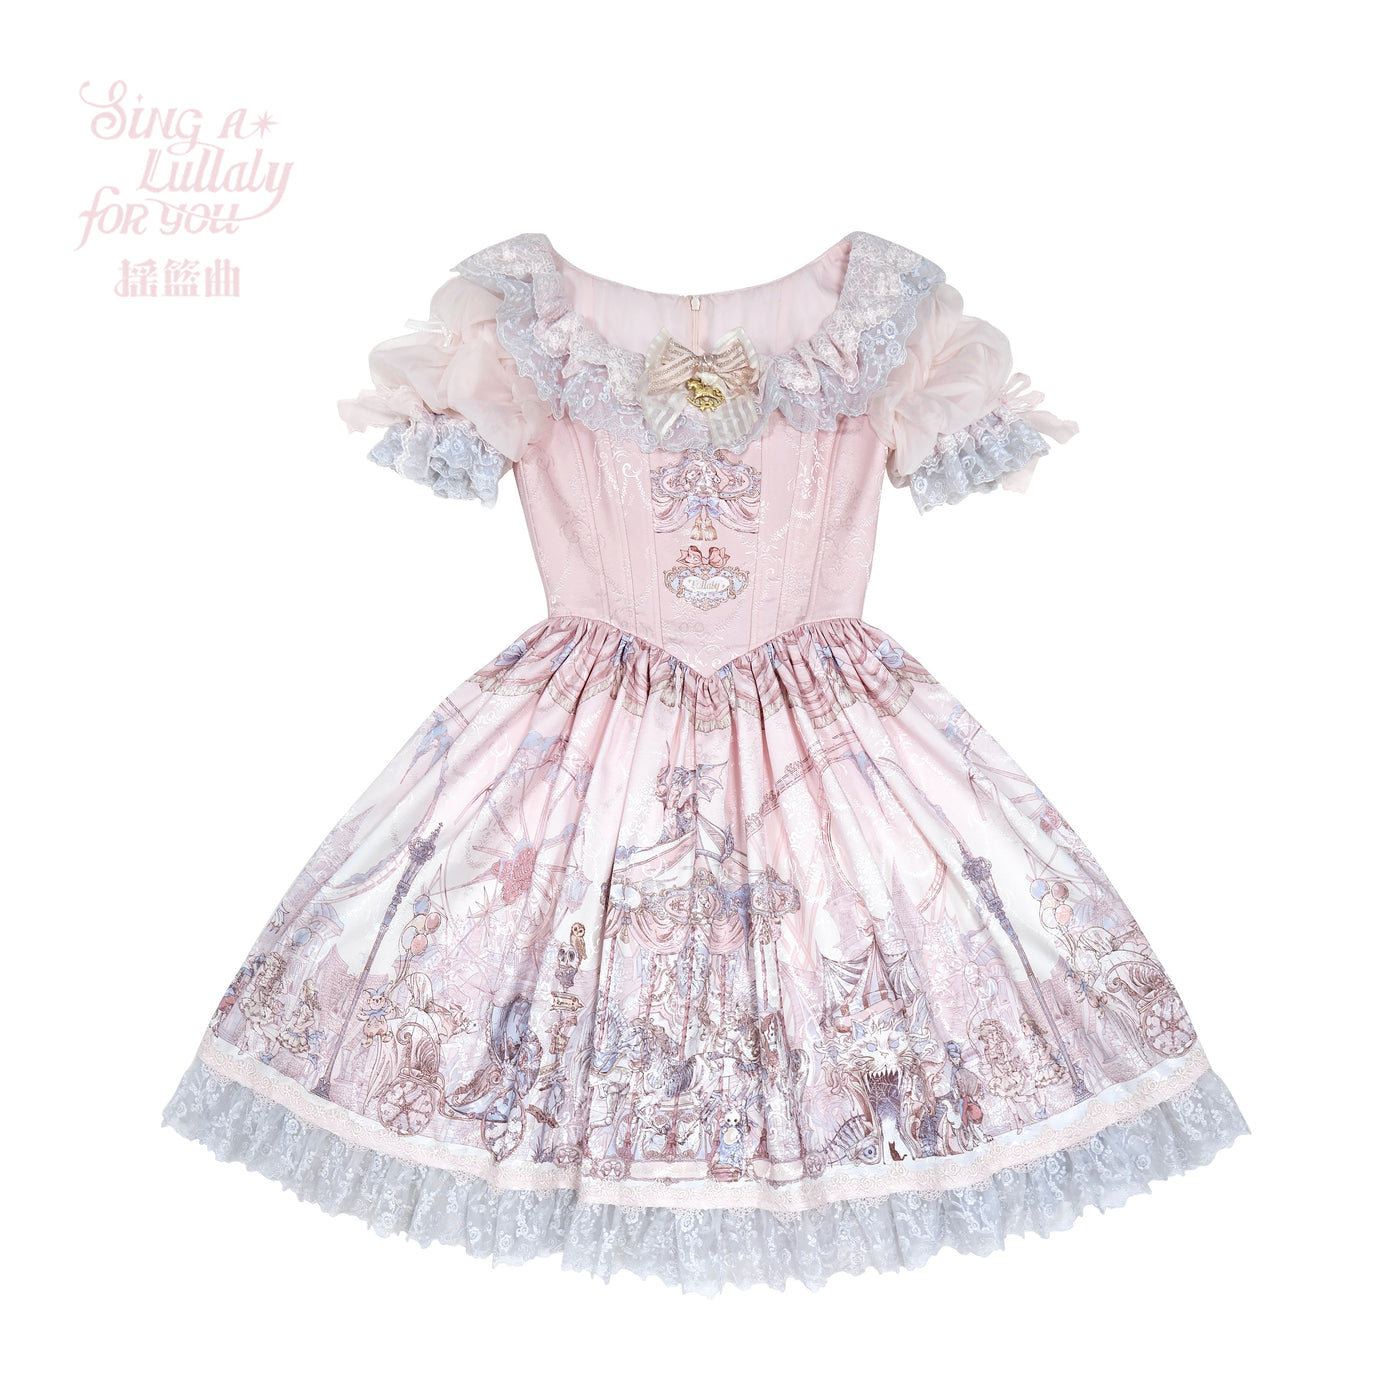 (BFM)Lullaby~Dream Playground Sweet Lolita OP Dress Pink-XS (pre-order, 7-8 months need to wait)  